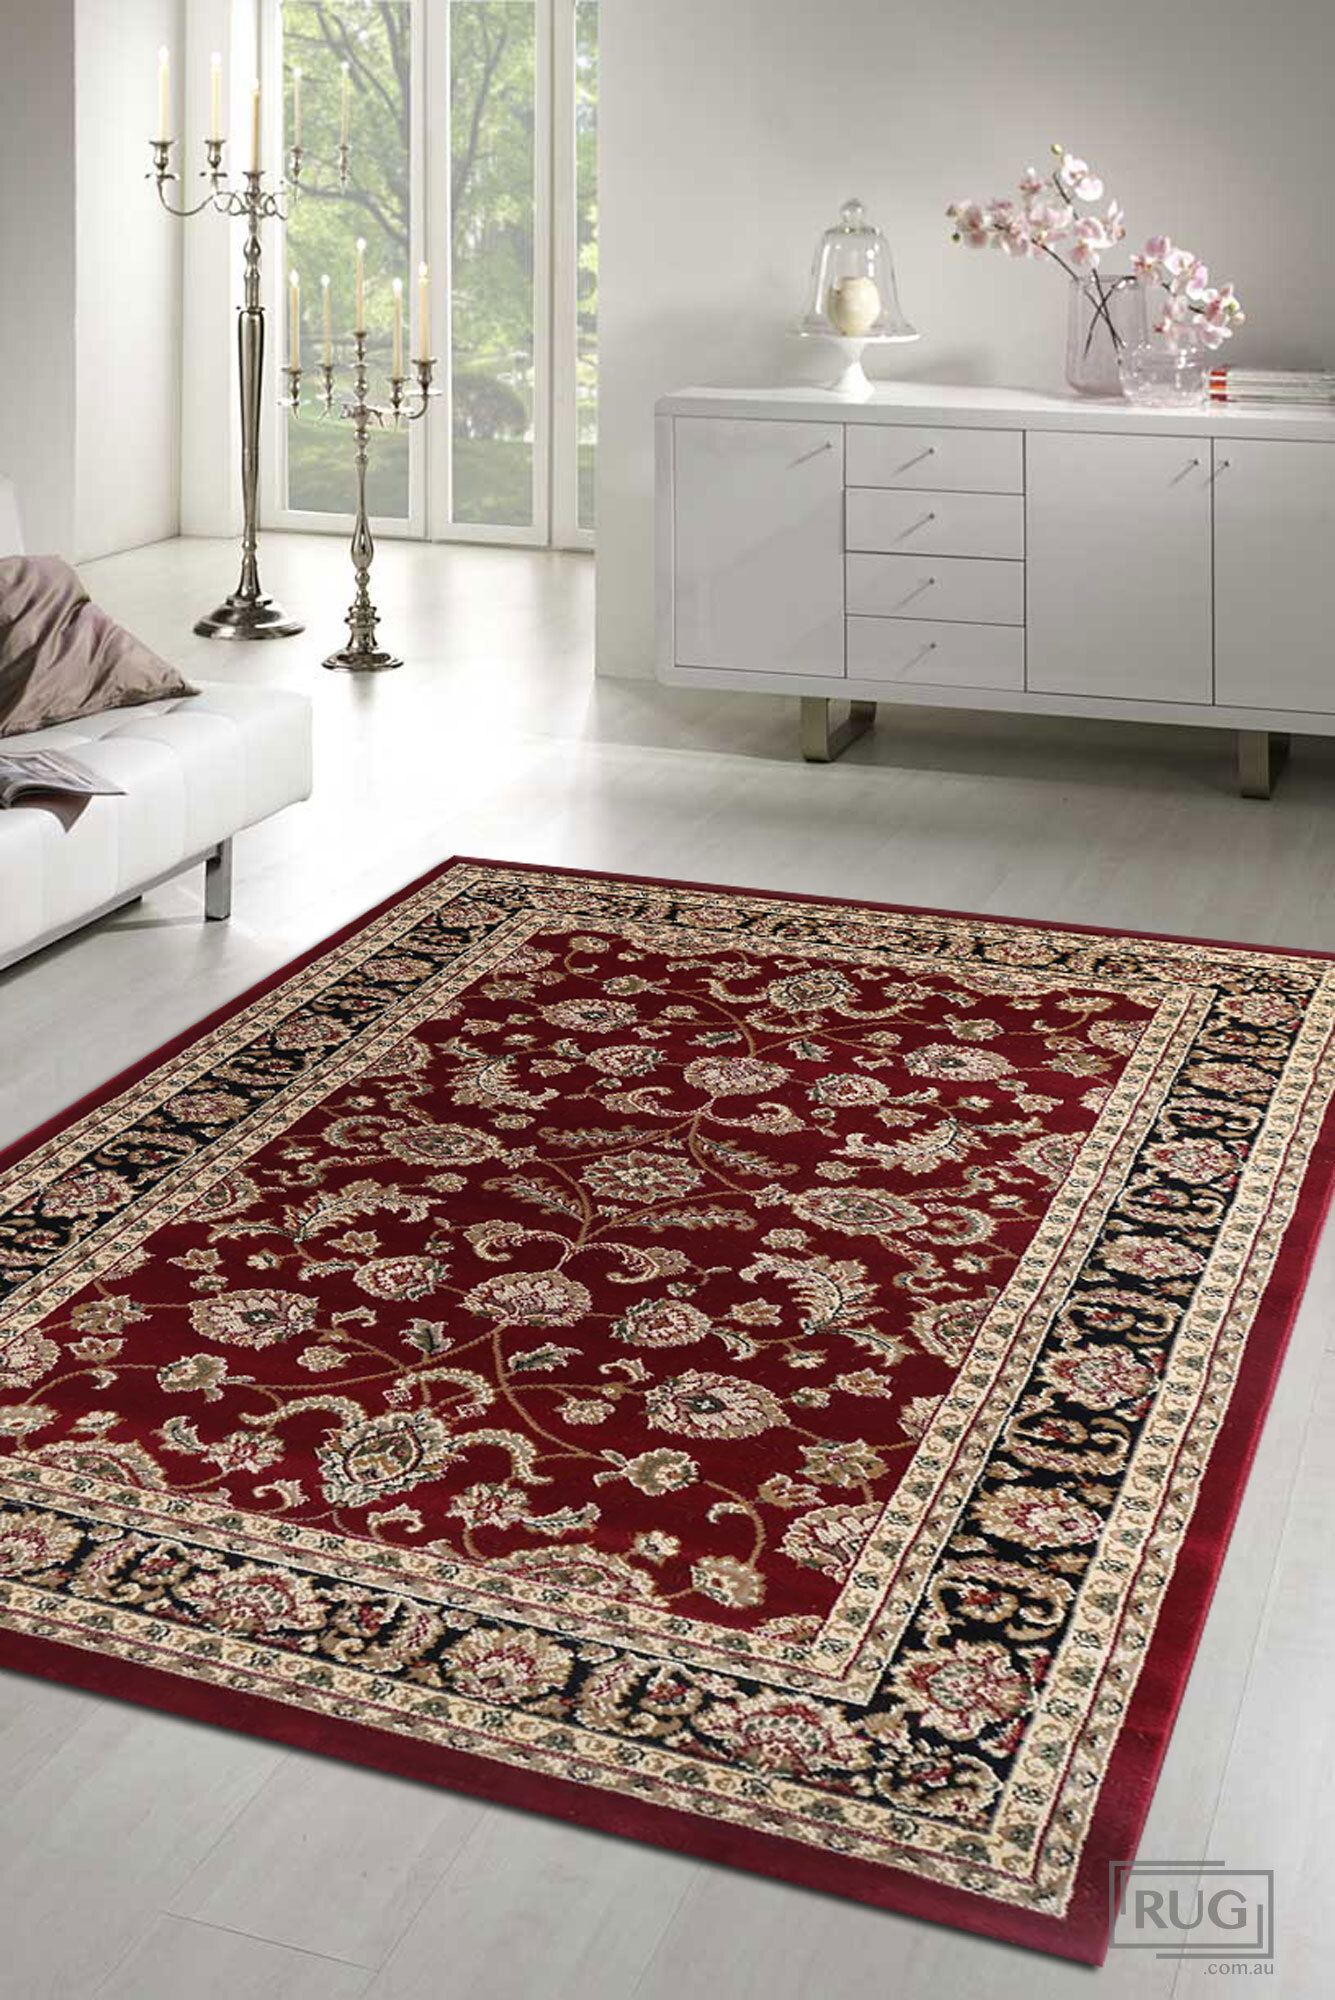 Justin Traditional Ornate Rug(Size 170 x 120cm)